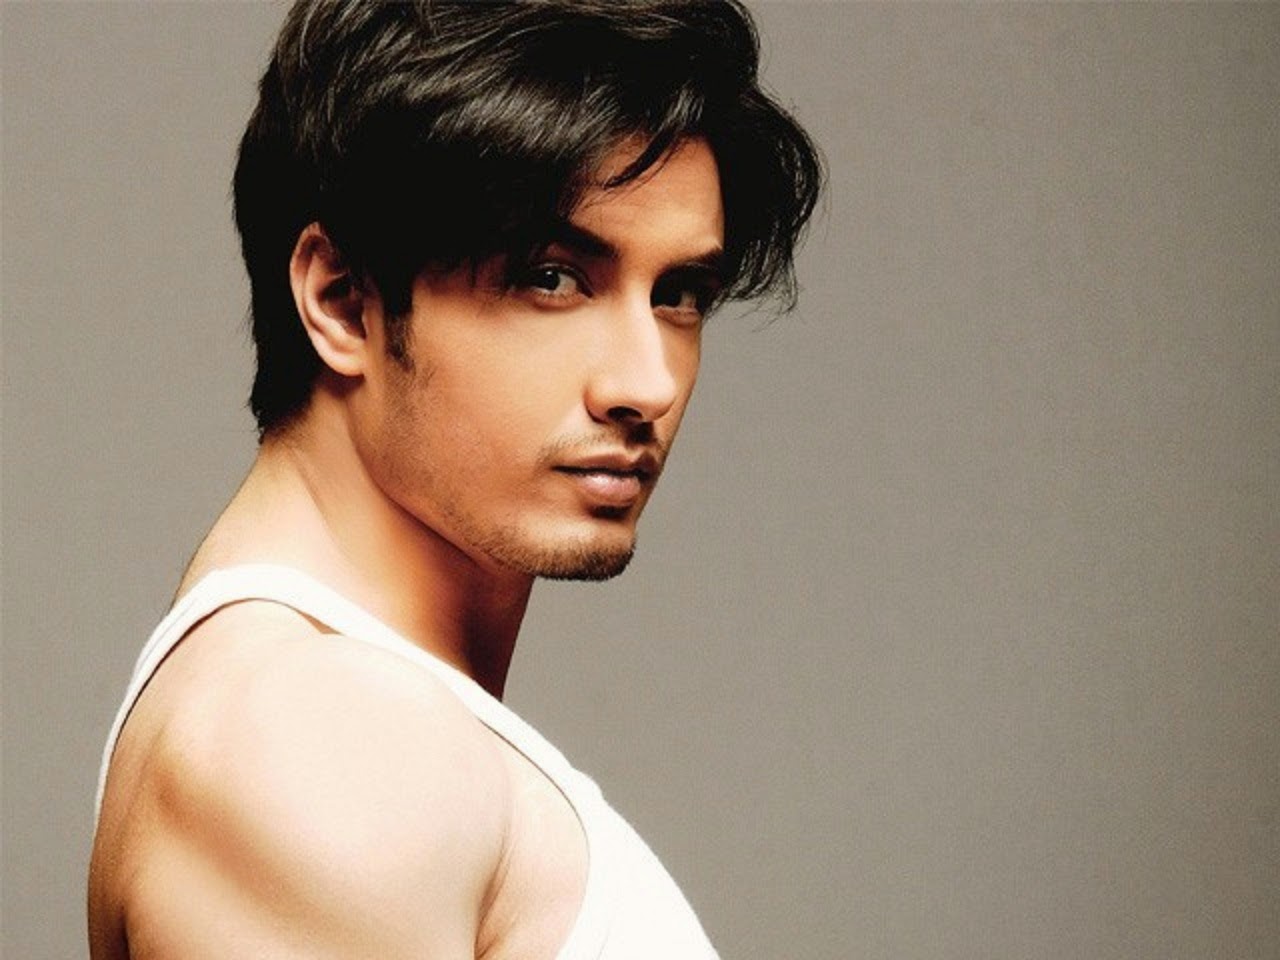 To be truly woke we need to be truly non-judgmental: Ali Zafar